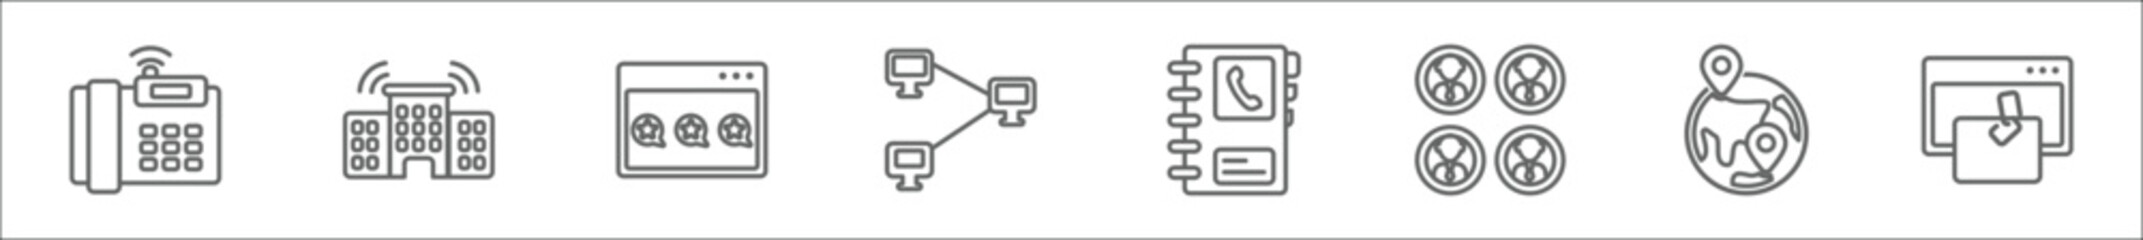 outline set of networking line icons. linear vector icons such as domestic phone, school network, stars balloons, continuous line, contact book, group avatar, localization, backlink